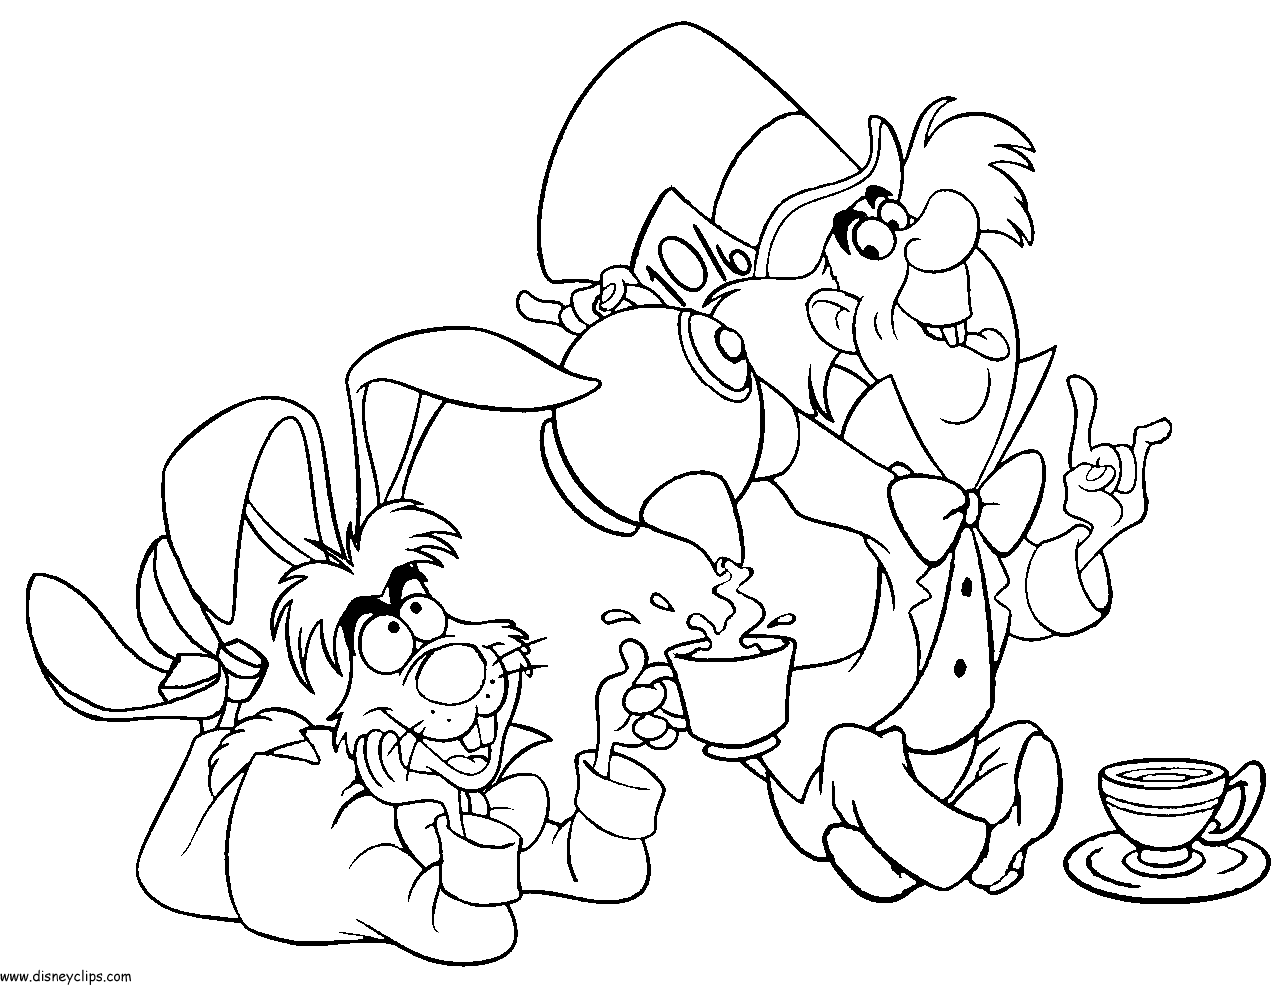 March Hare and Mad Hatter Coloring Page